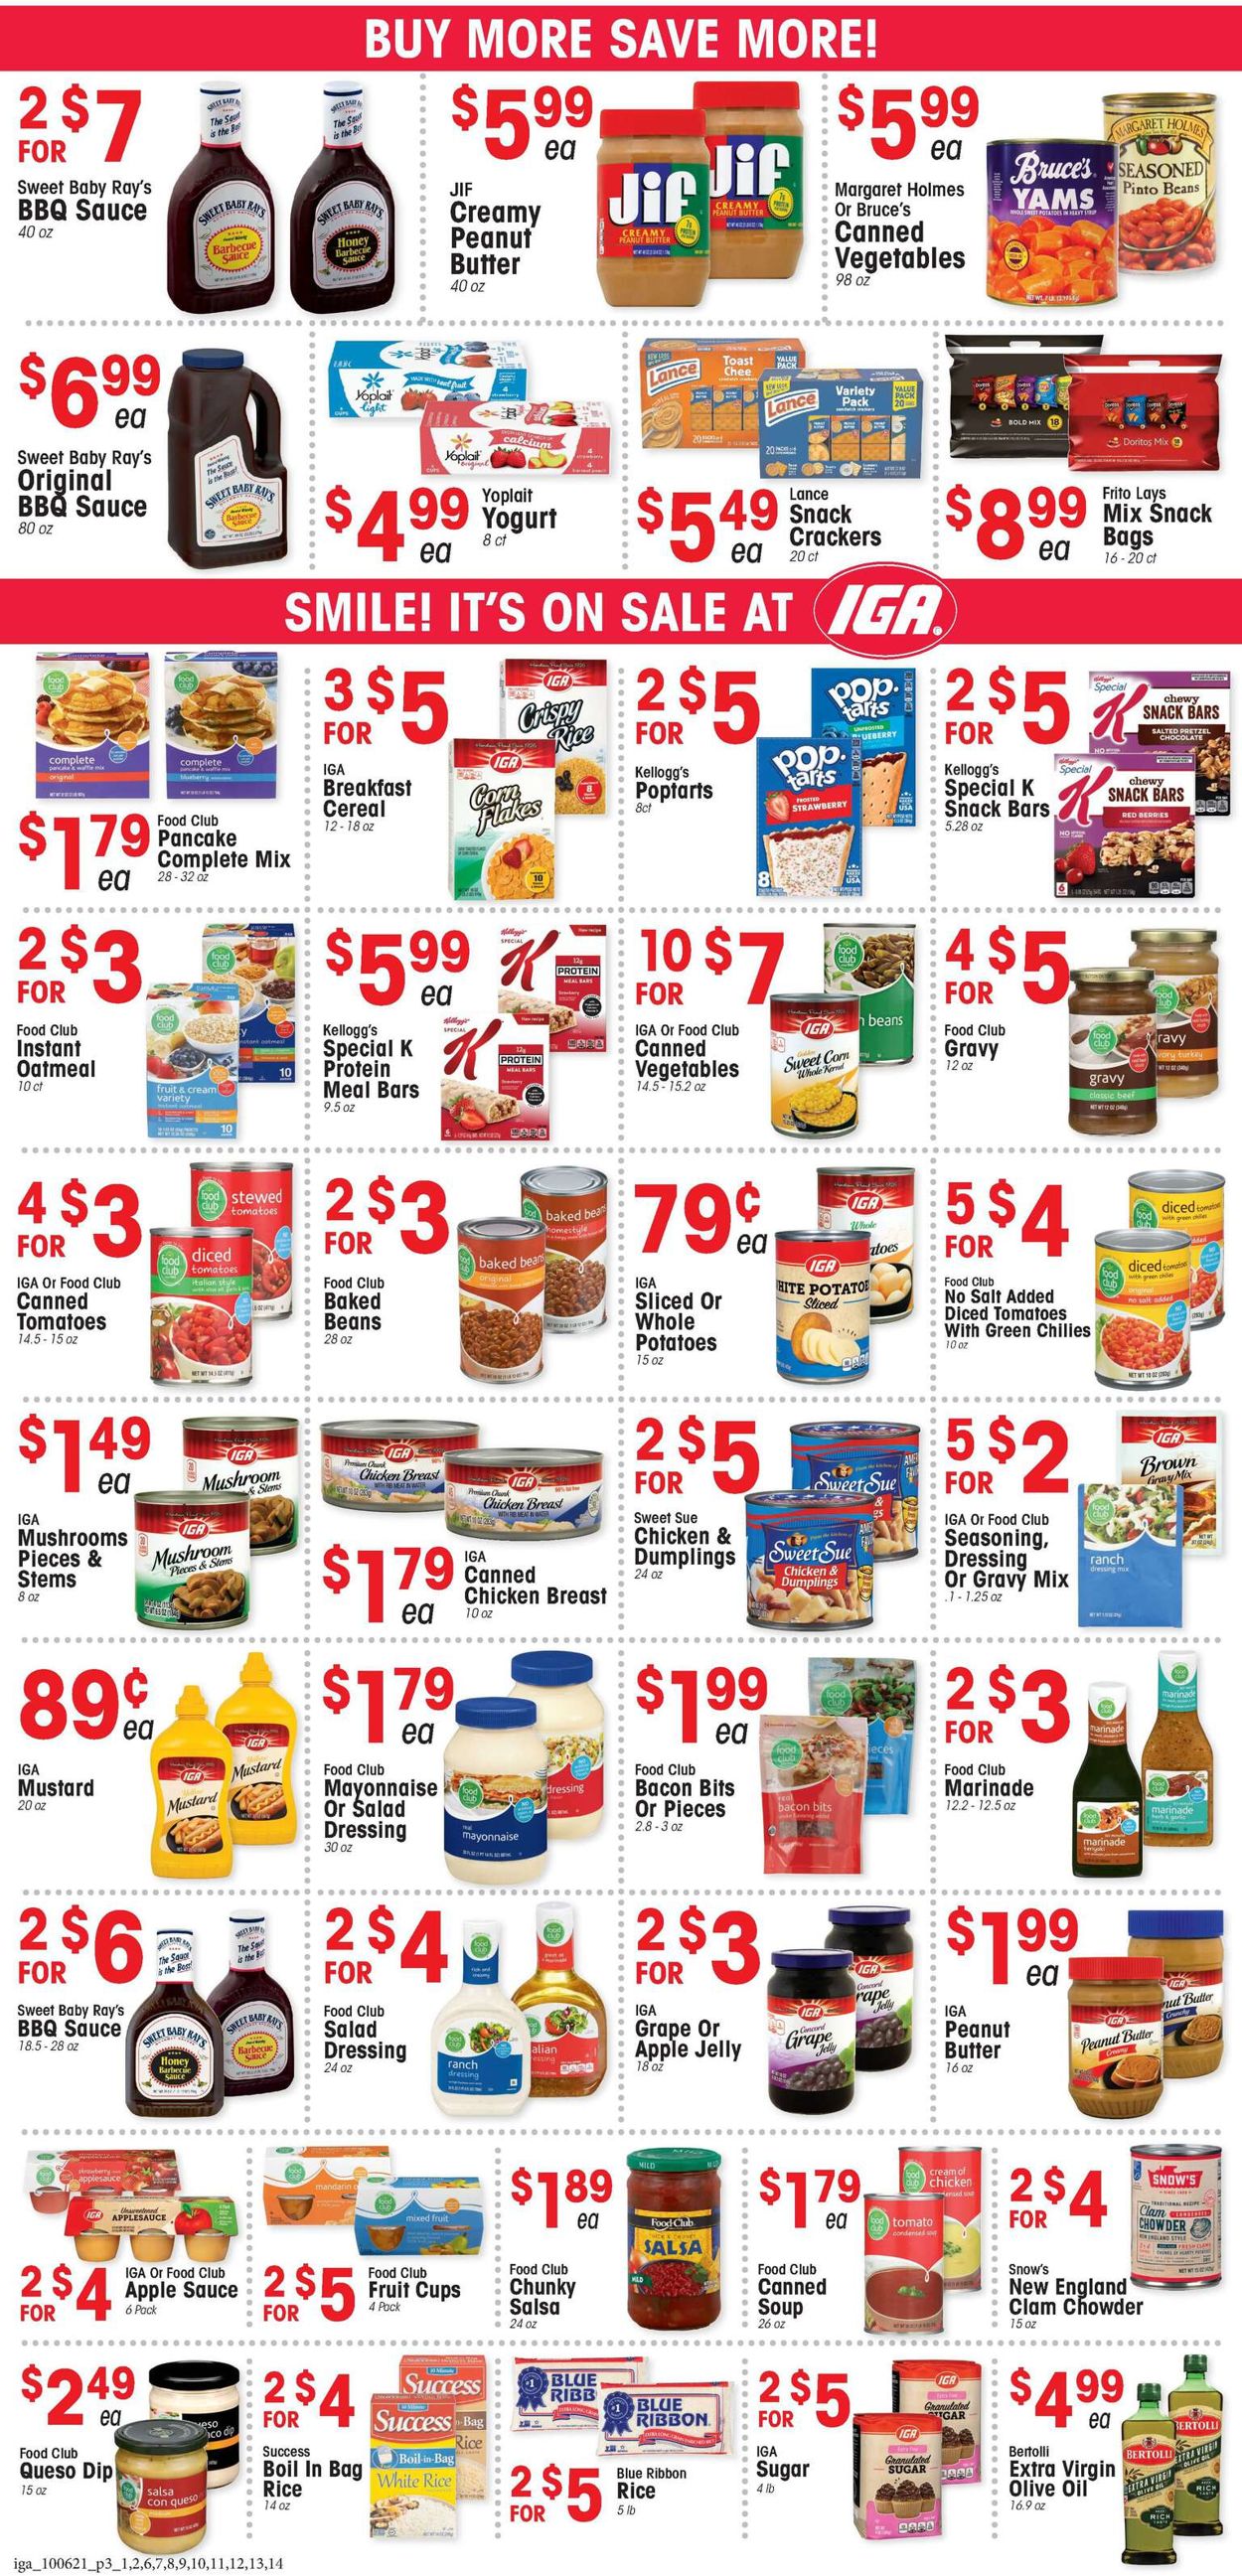 IGA Current weekly ad 10/06 - 10/12/2021 [3] - frequent-ads.com